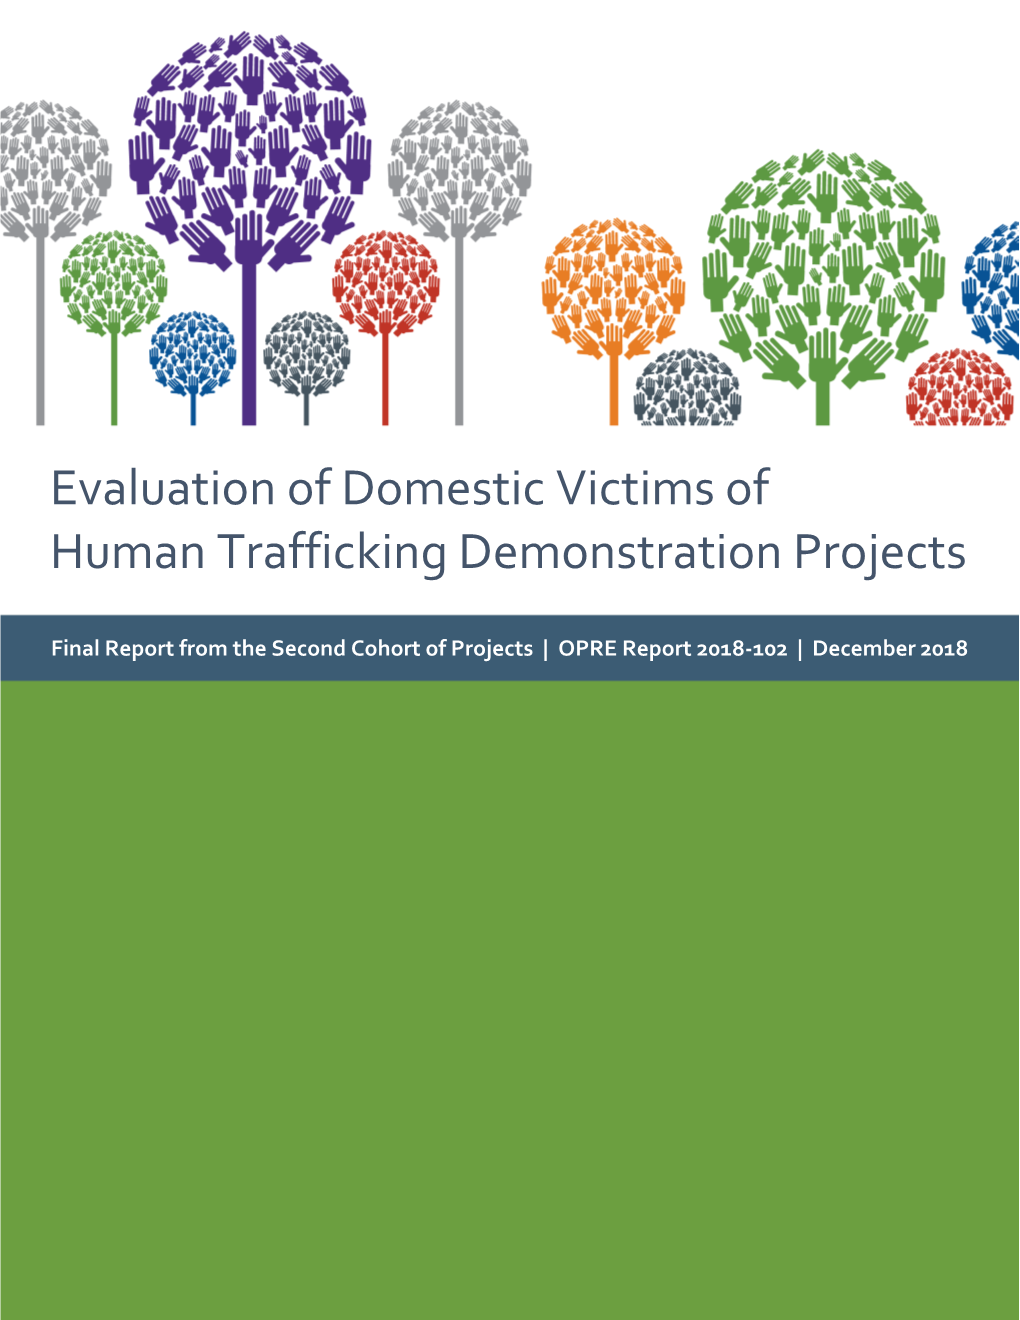 Evaluation of Domestic Victims of Human Trafficking Demonstration Projects